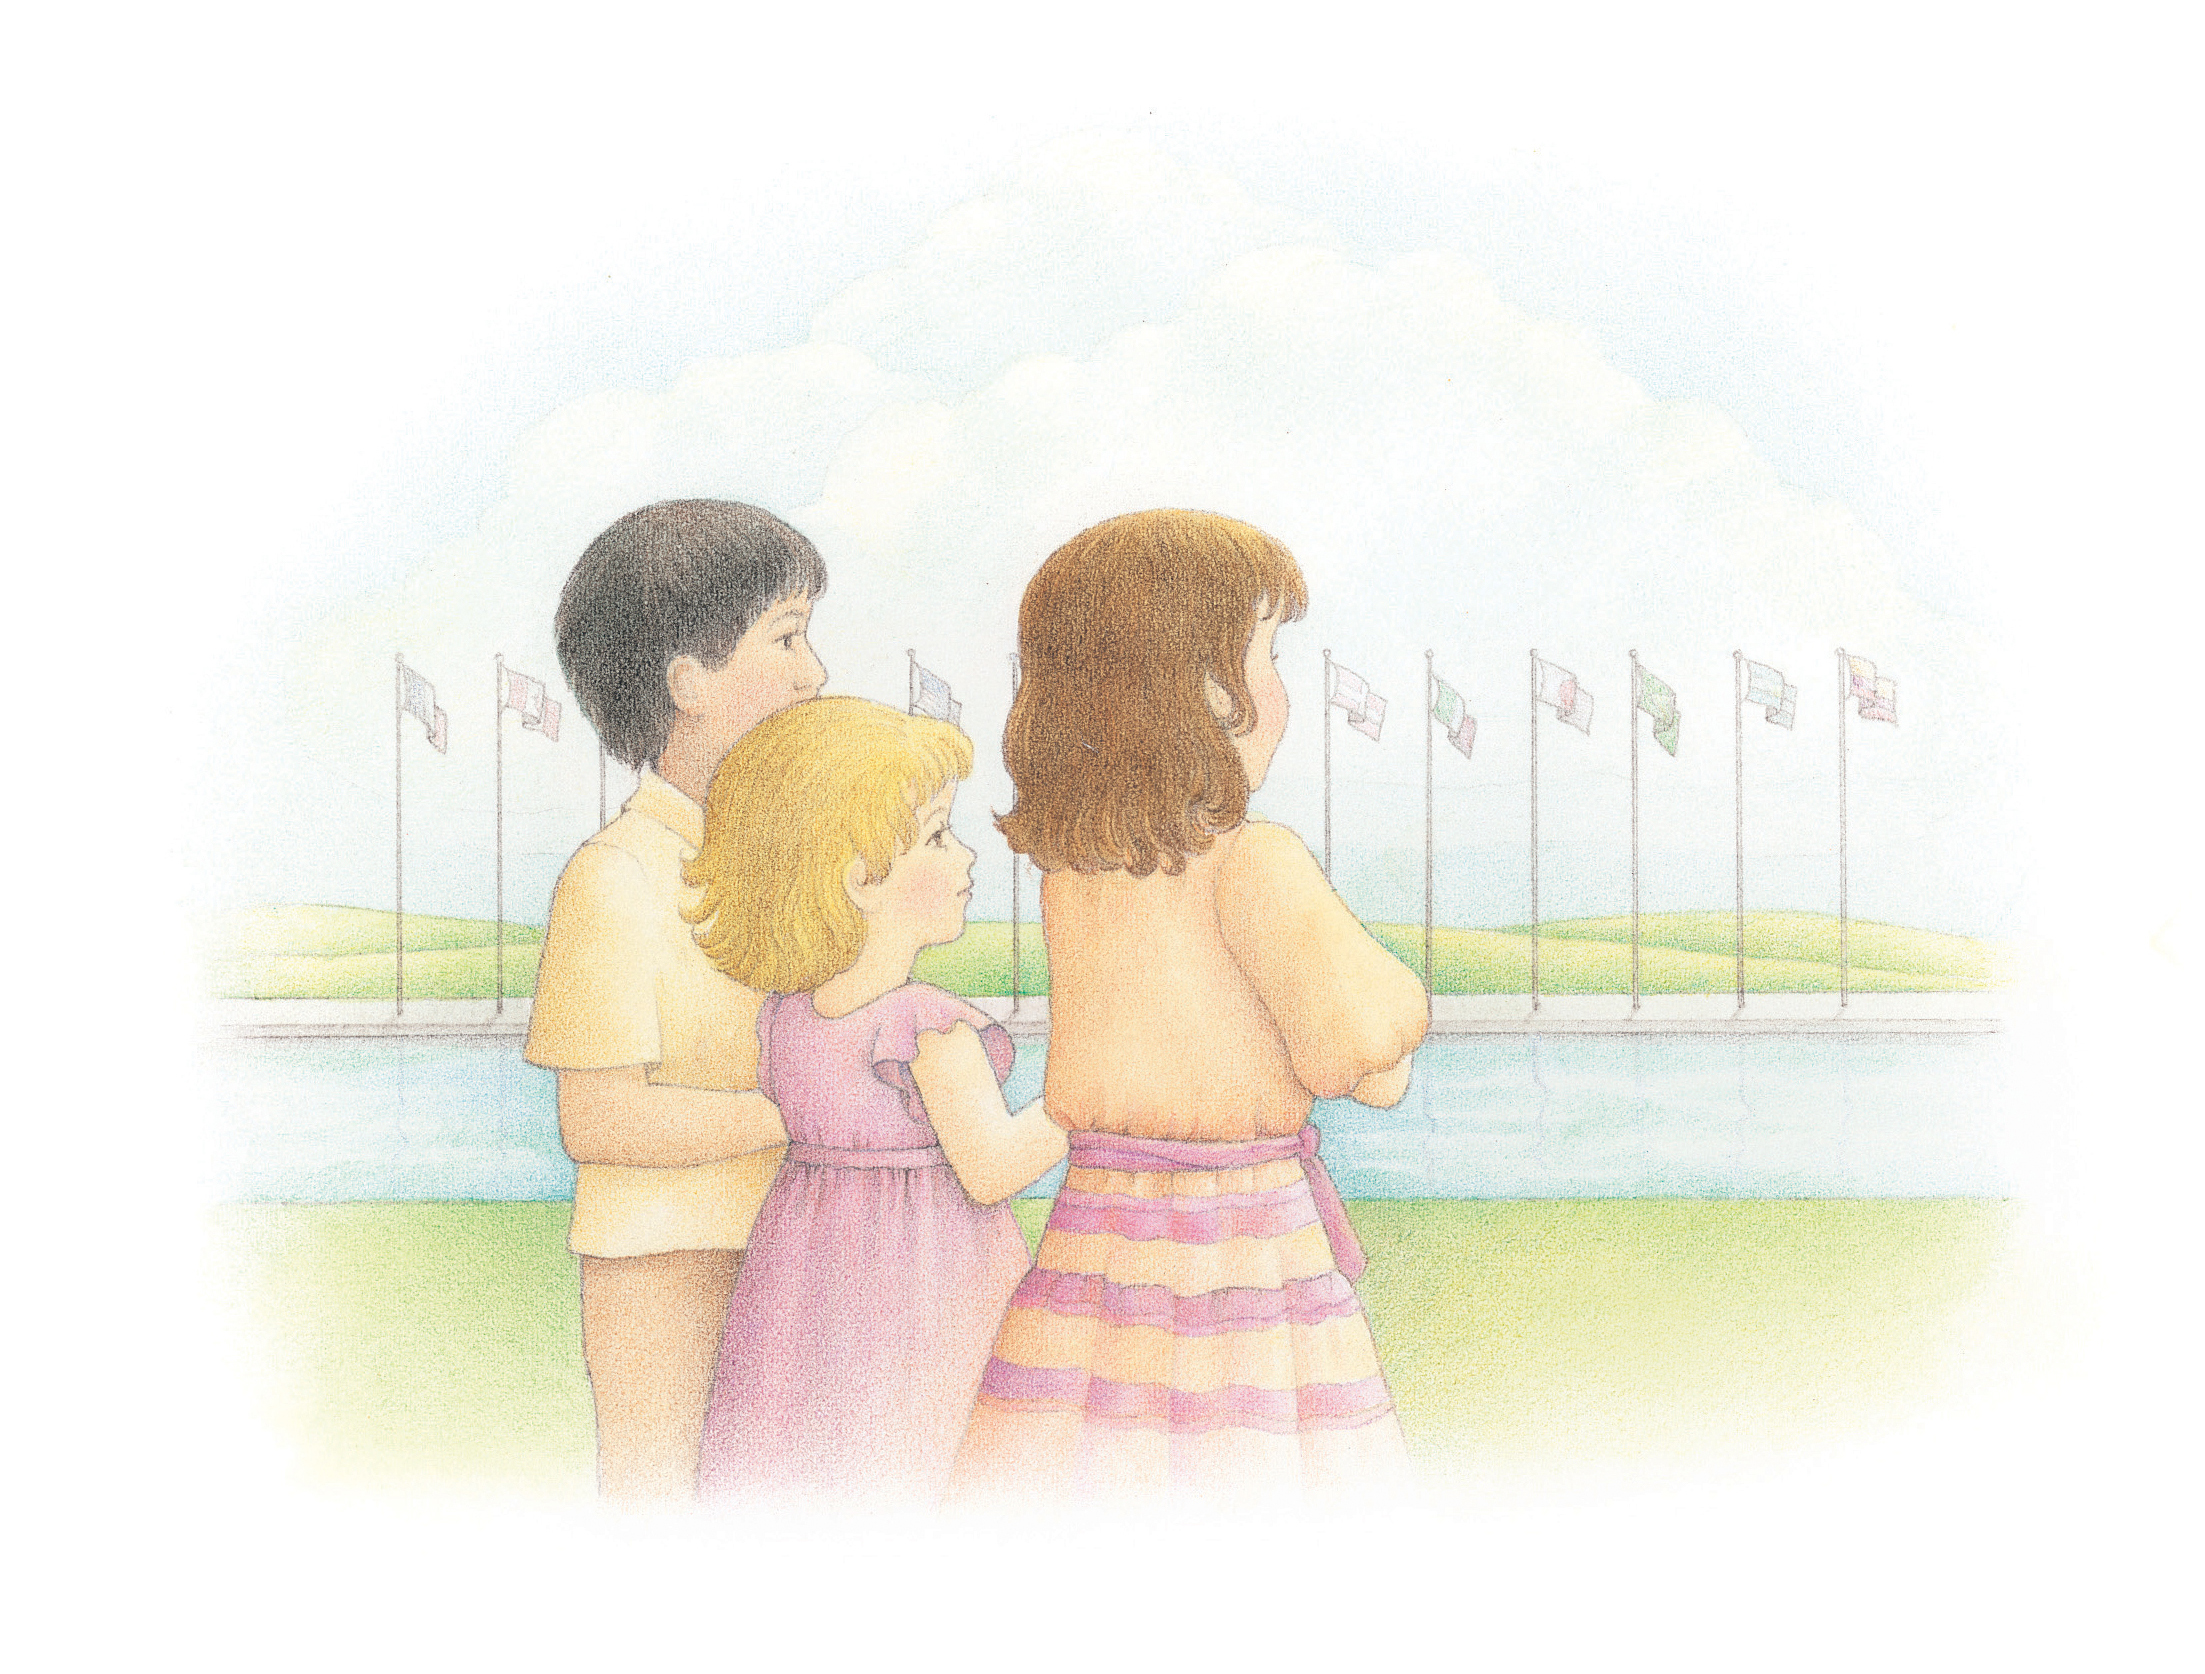 A watercolor illustration of three children standing in a field, looking toward a long row of flags lined up across a small channel of water.